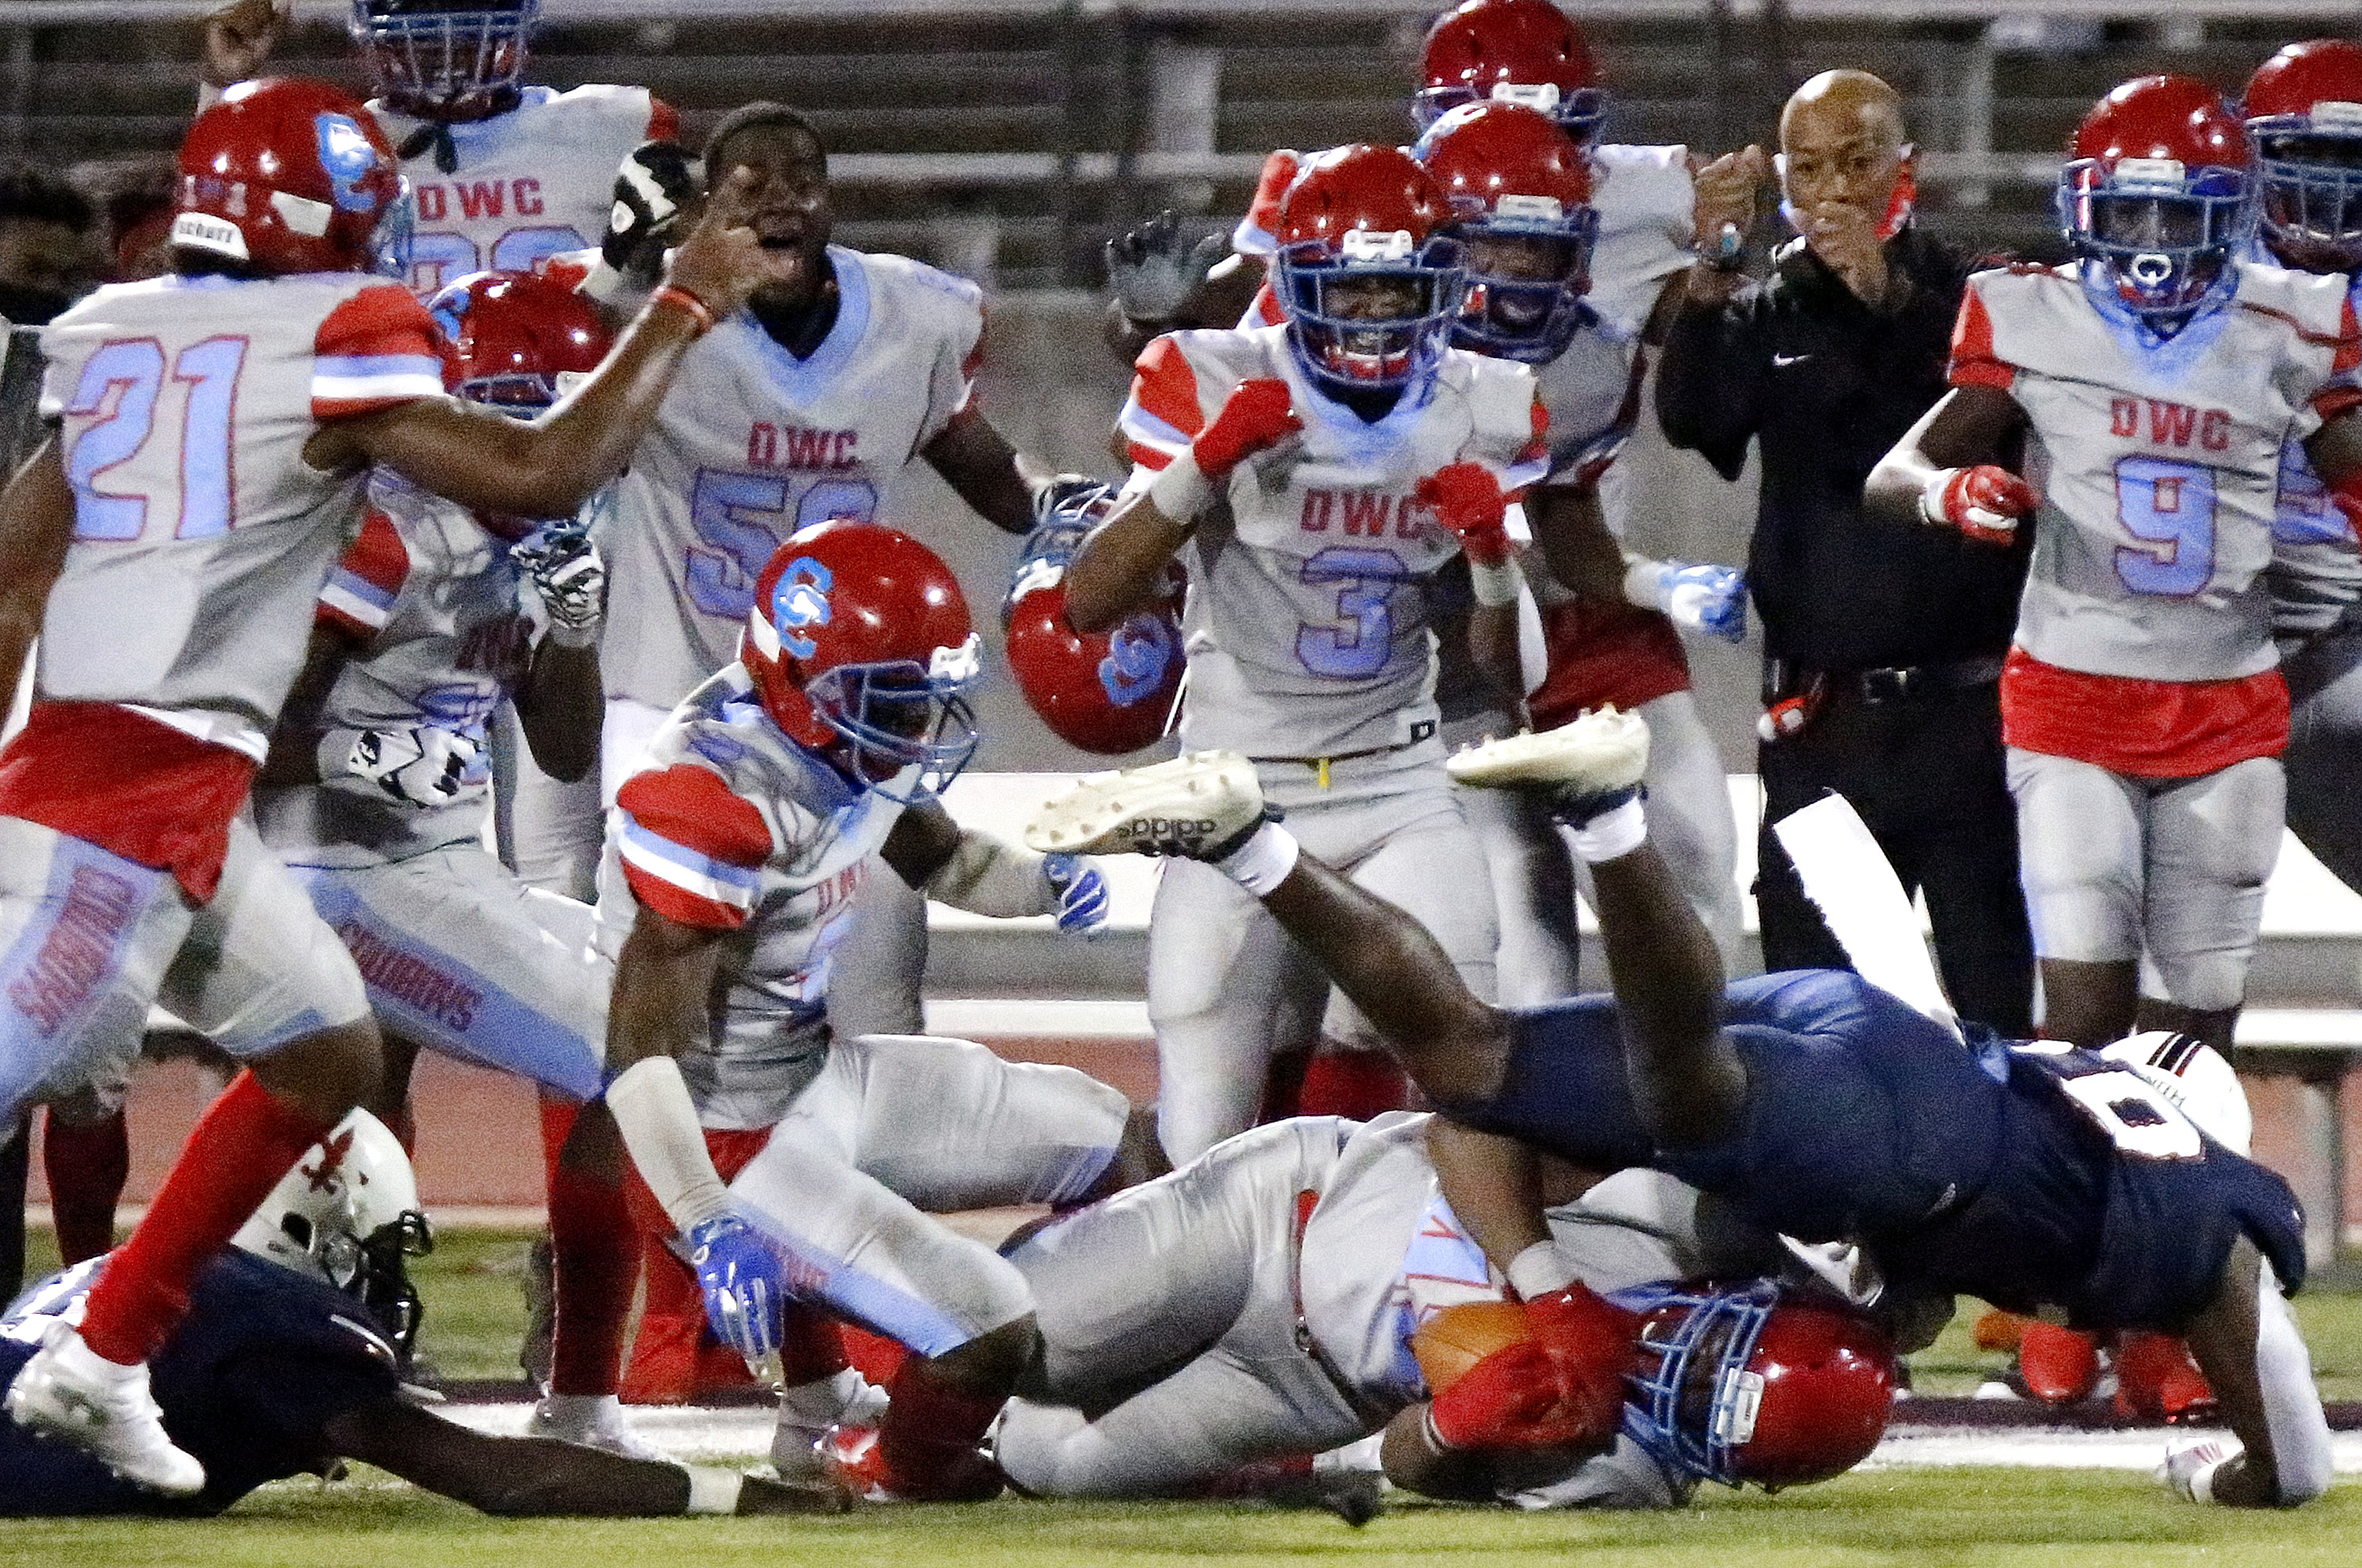 The Powerhouse of TXHSFB: The Reigning State Champ Duncanville